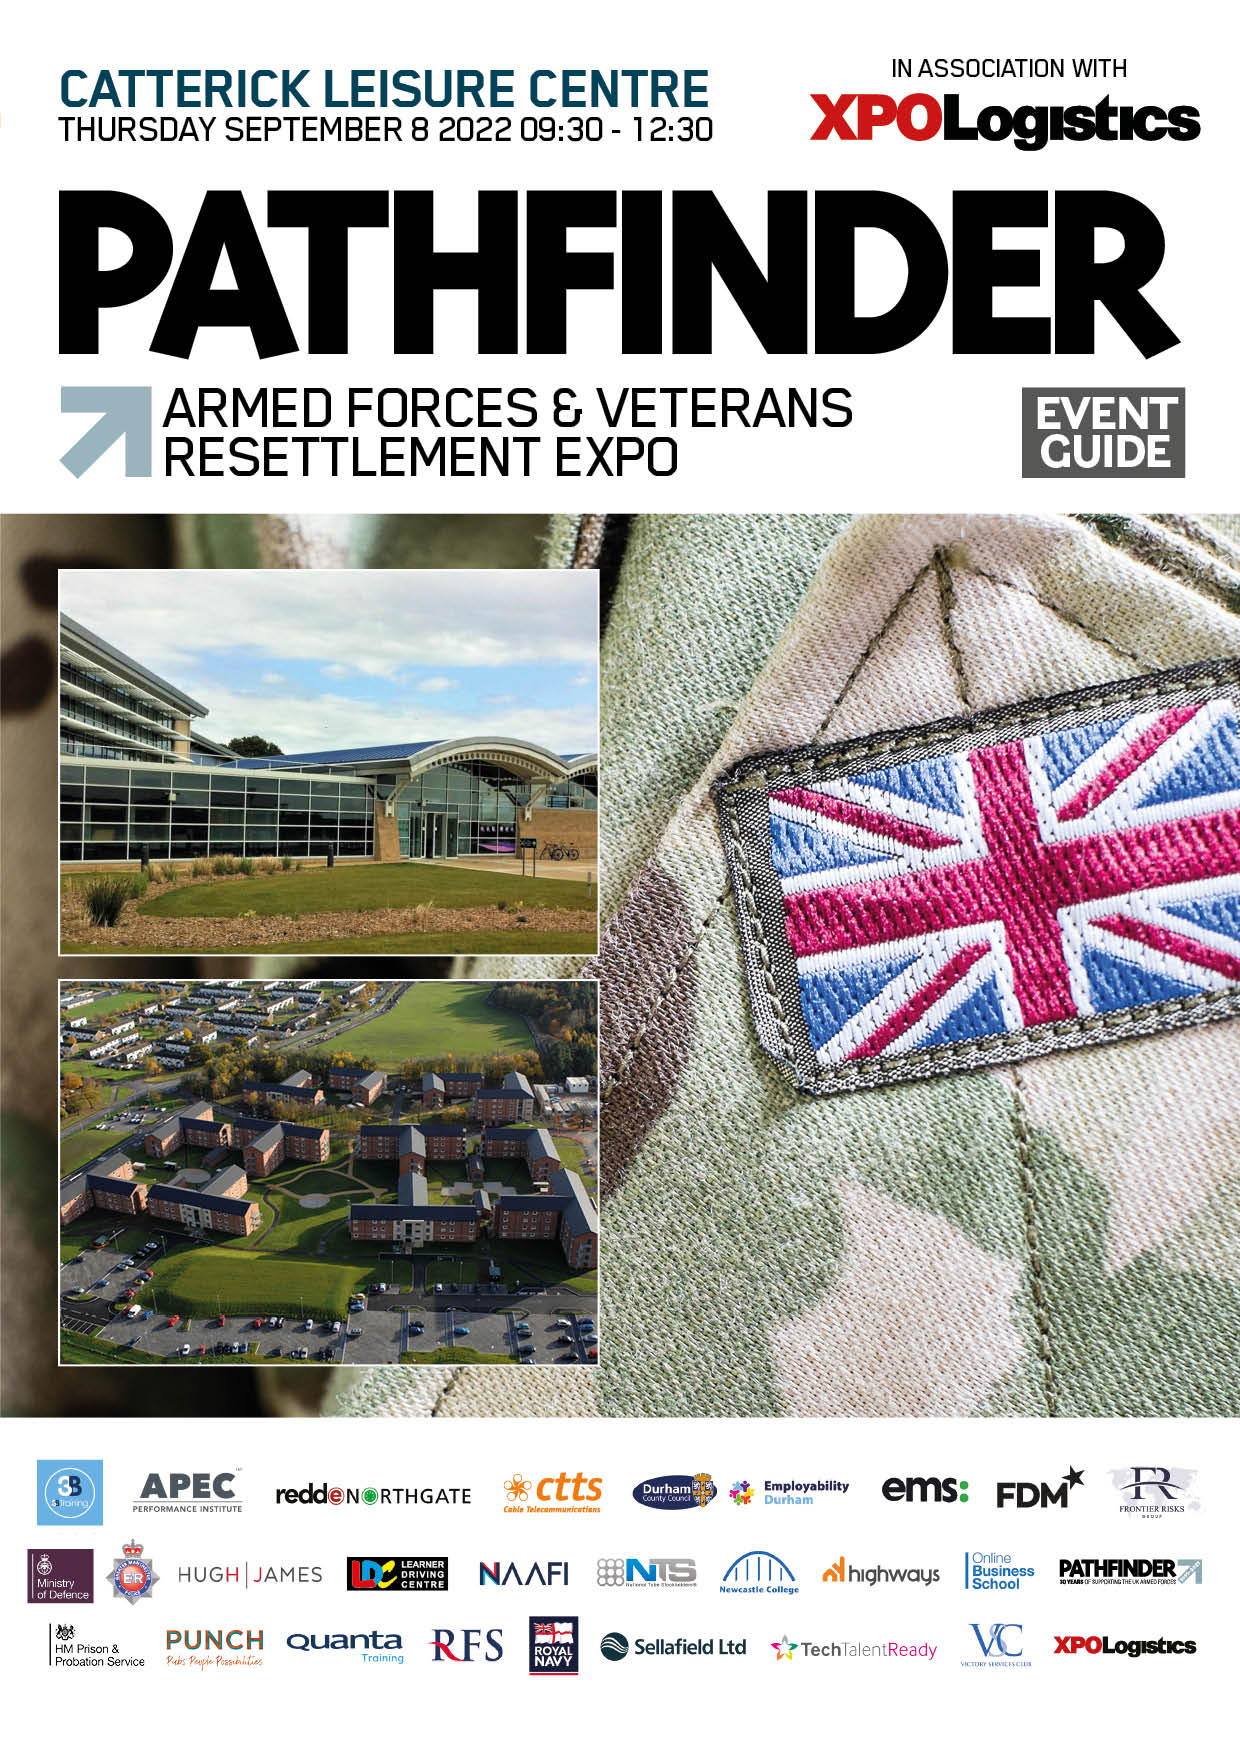 Armed Forces Expo Catterick Is On Today!